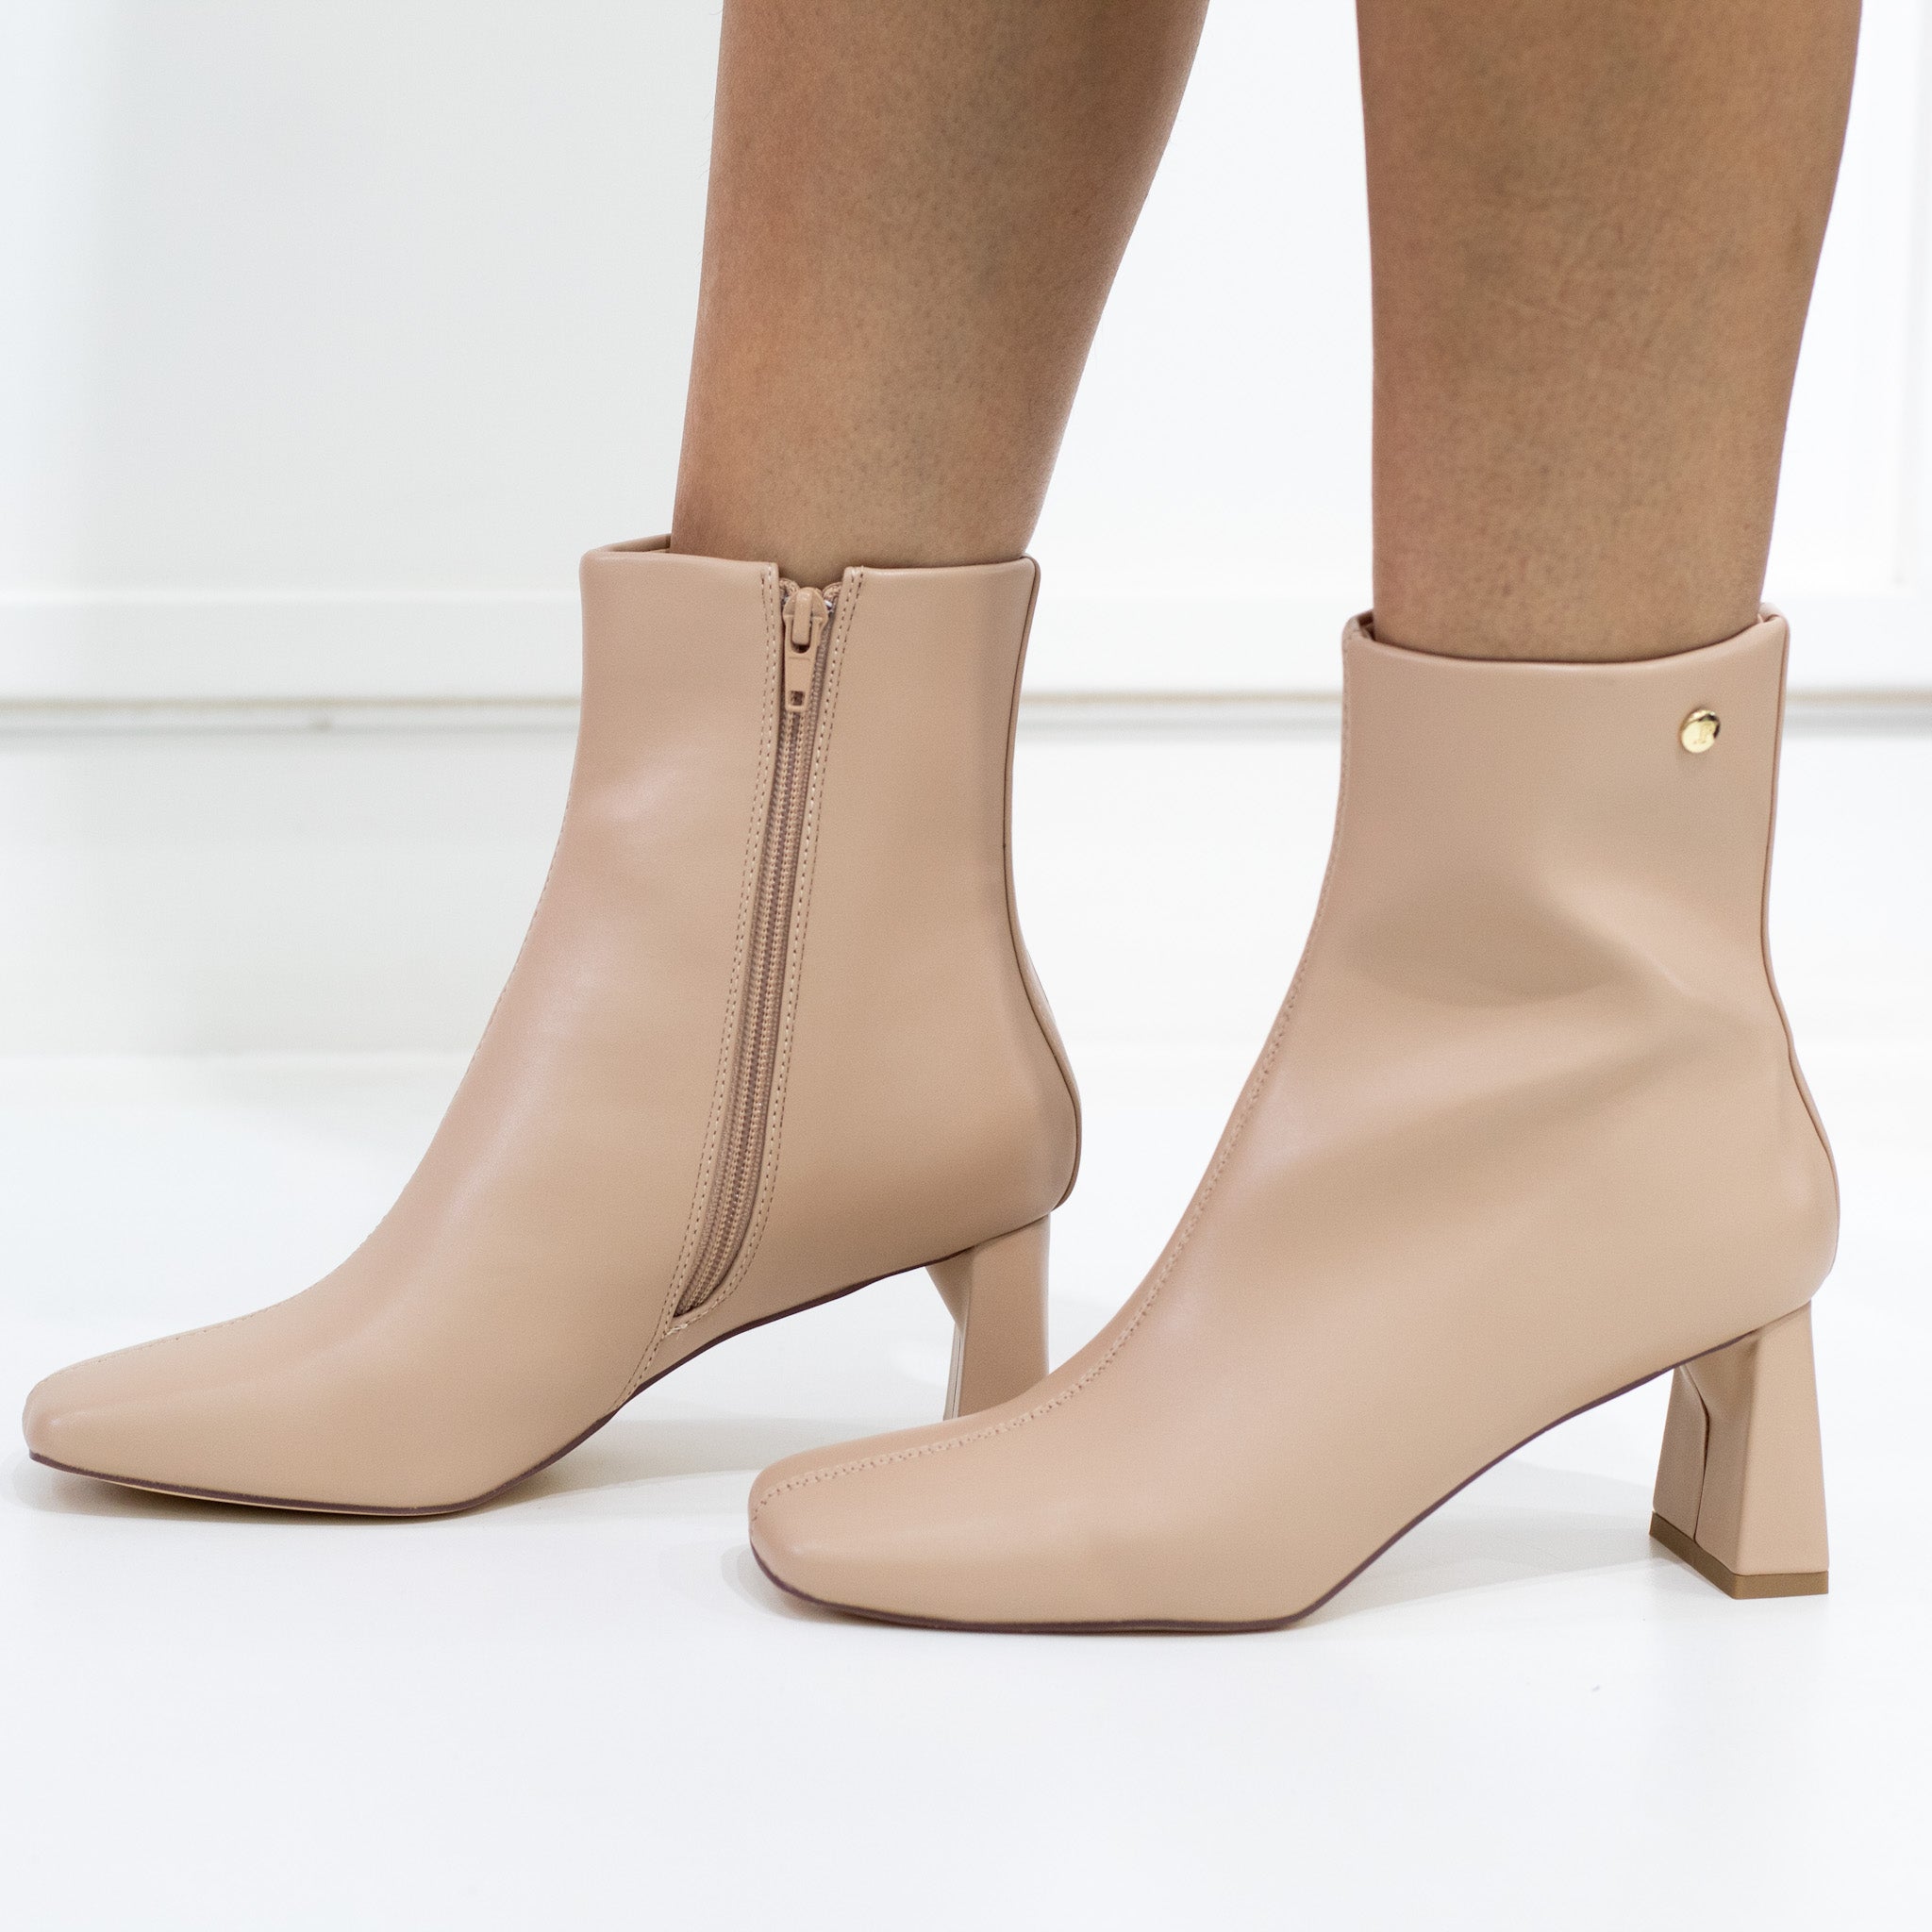 Nude 6.5cm heel square toe croc ankle boot filter